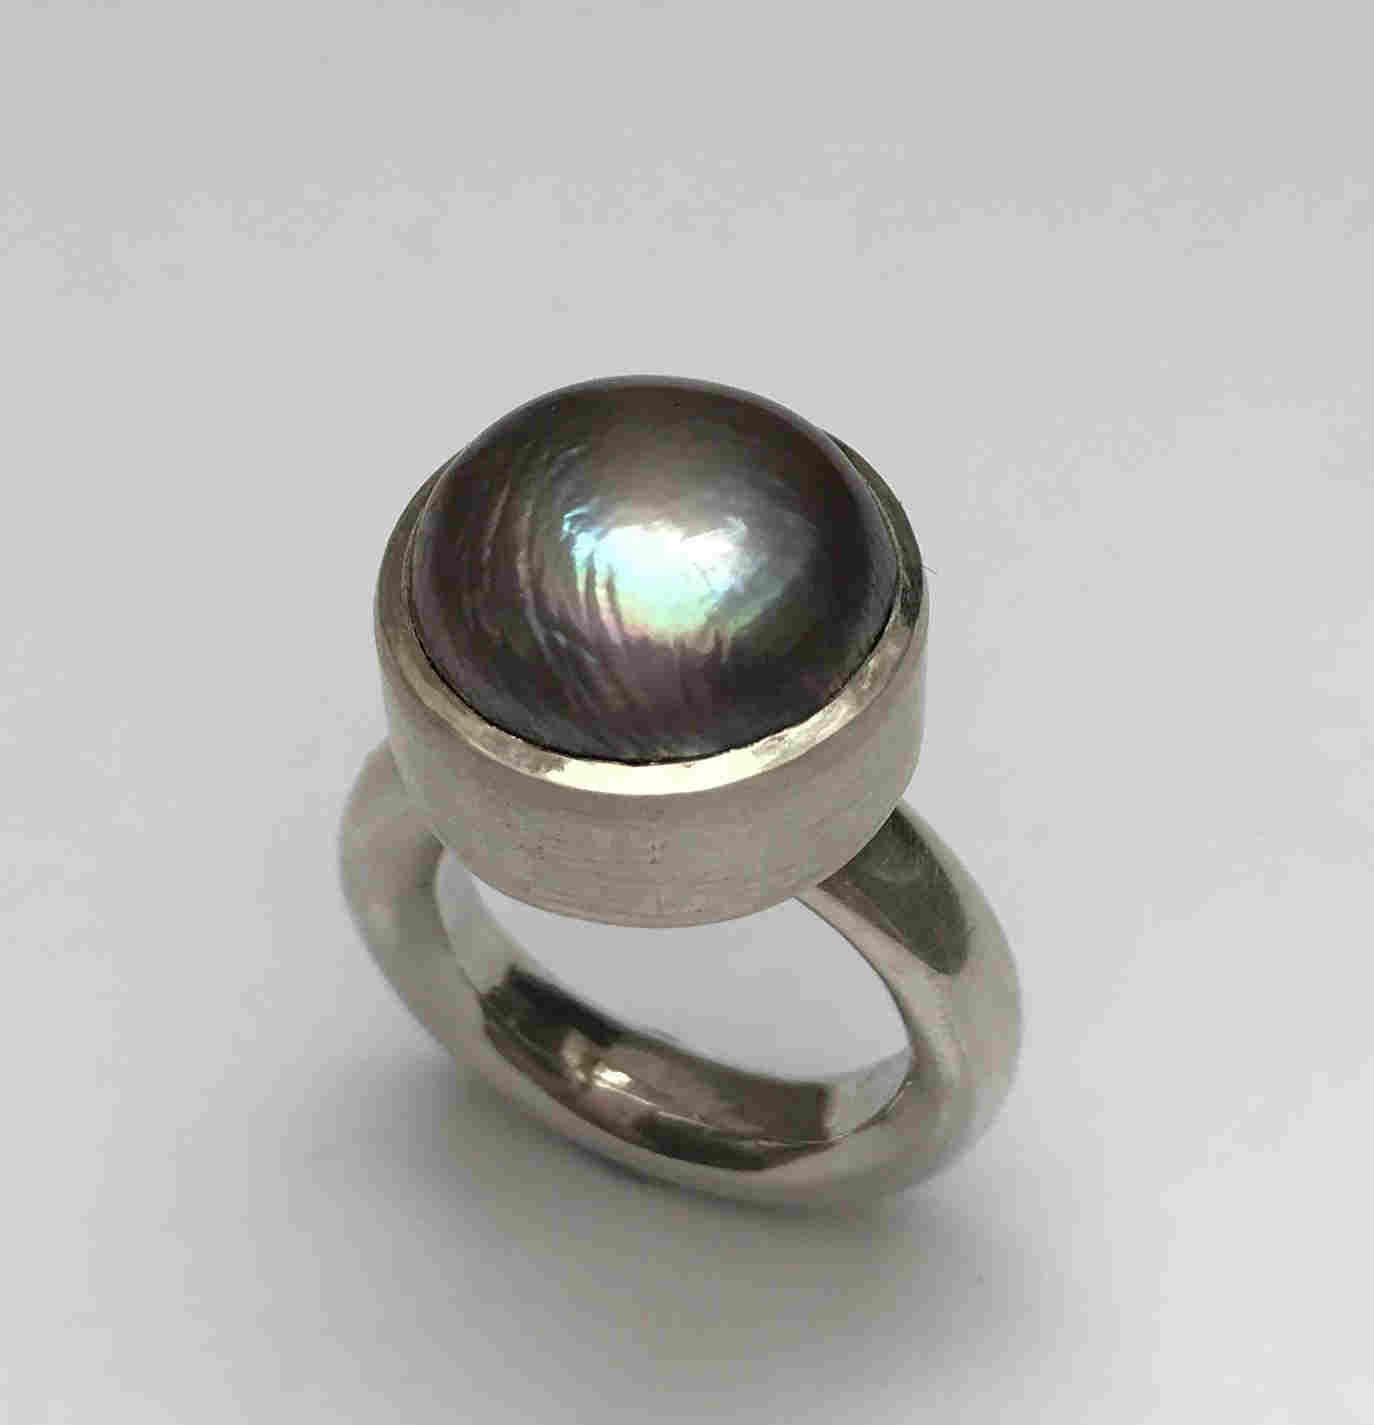 'Sterling Silver and Dove Grey Pearl Ring' by artist Carol Docherty